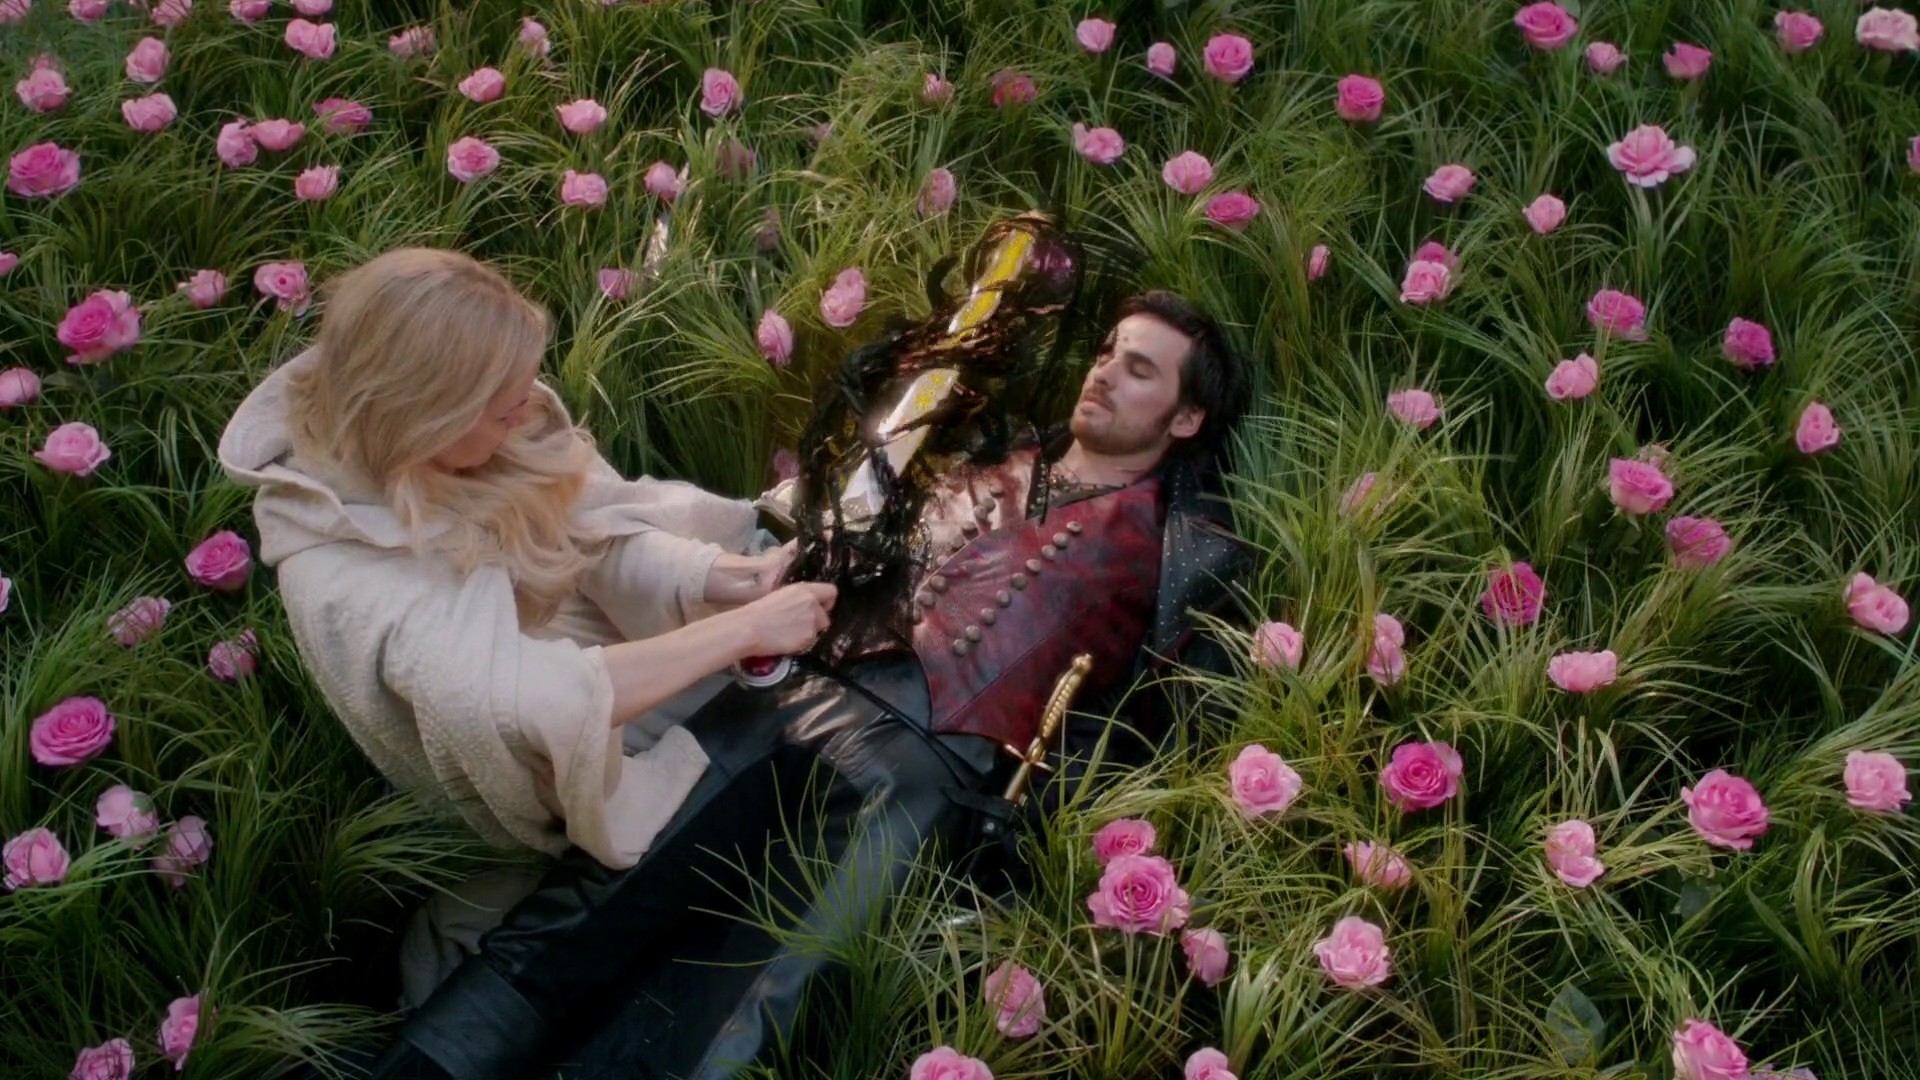 1920x1080 Once Upon a Time 5x08 Birth - Emma tethering Hook to the Excalbur